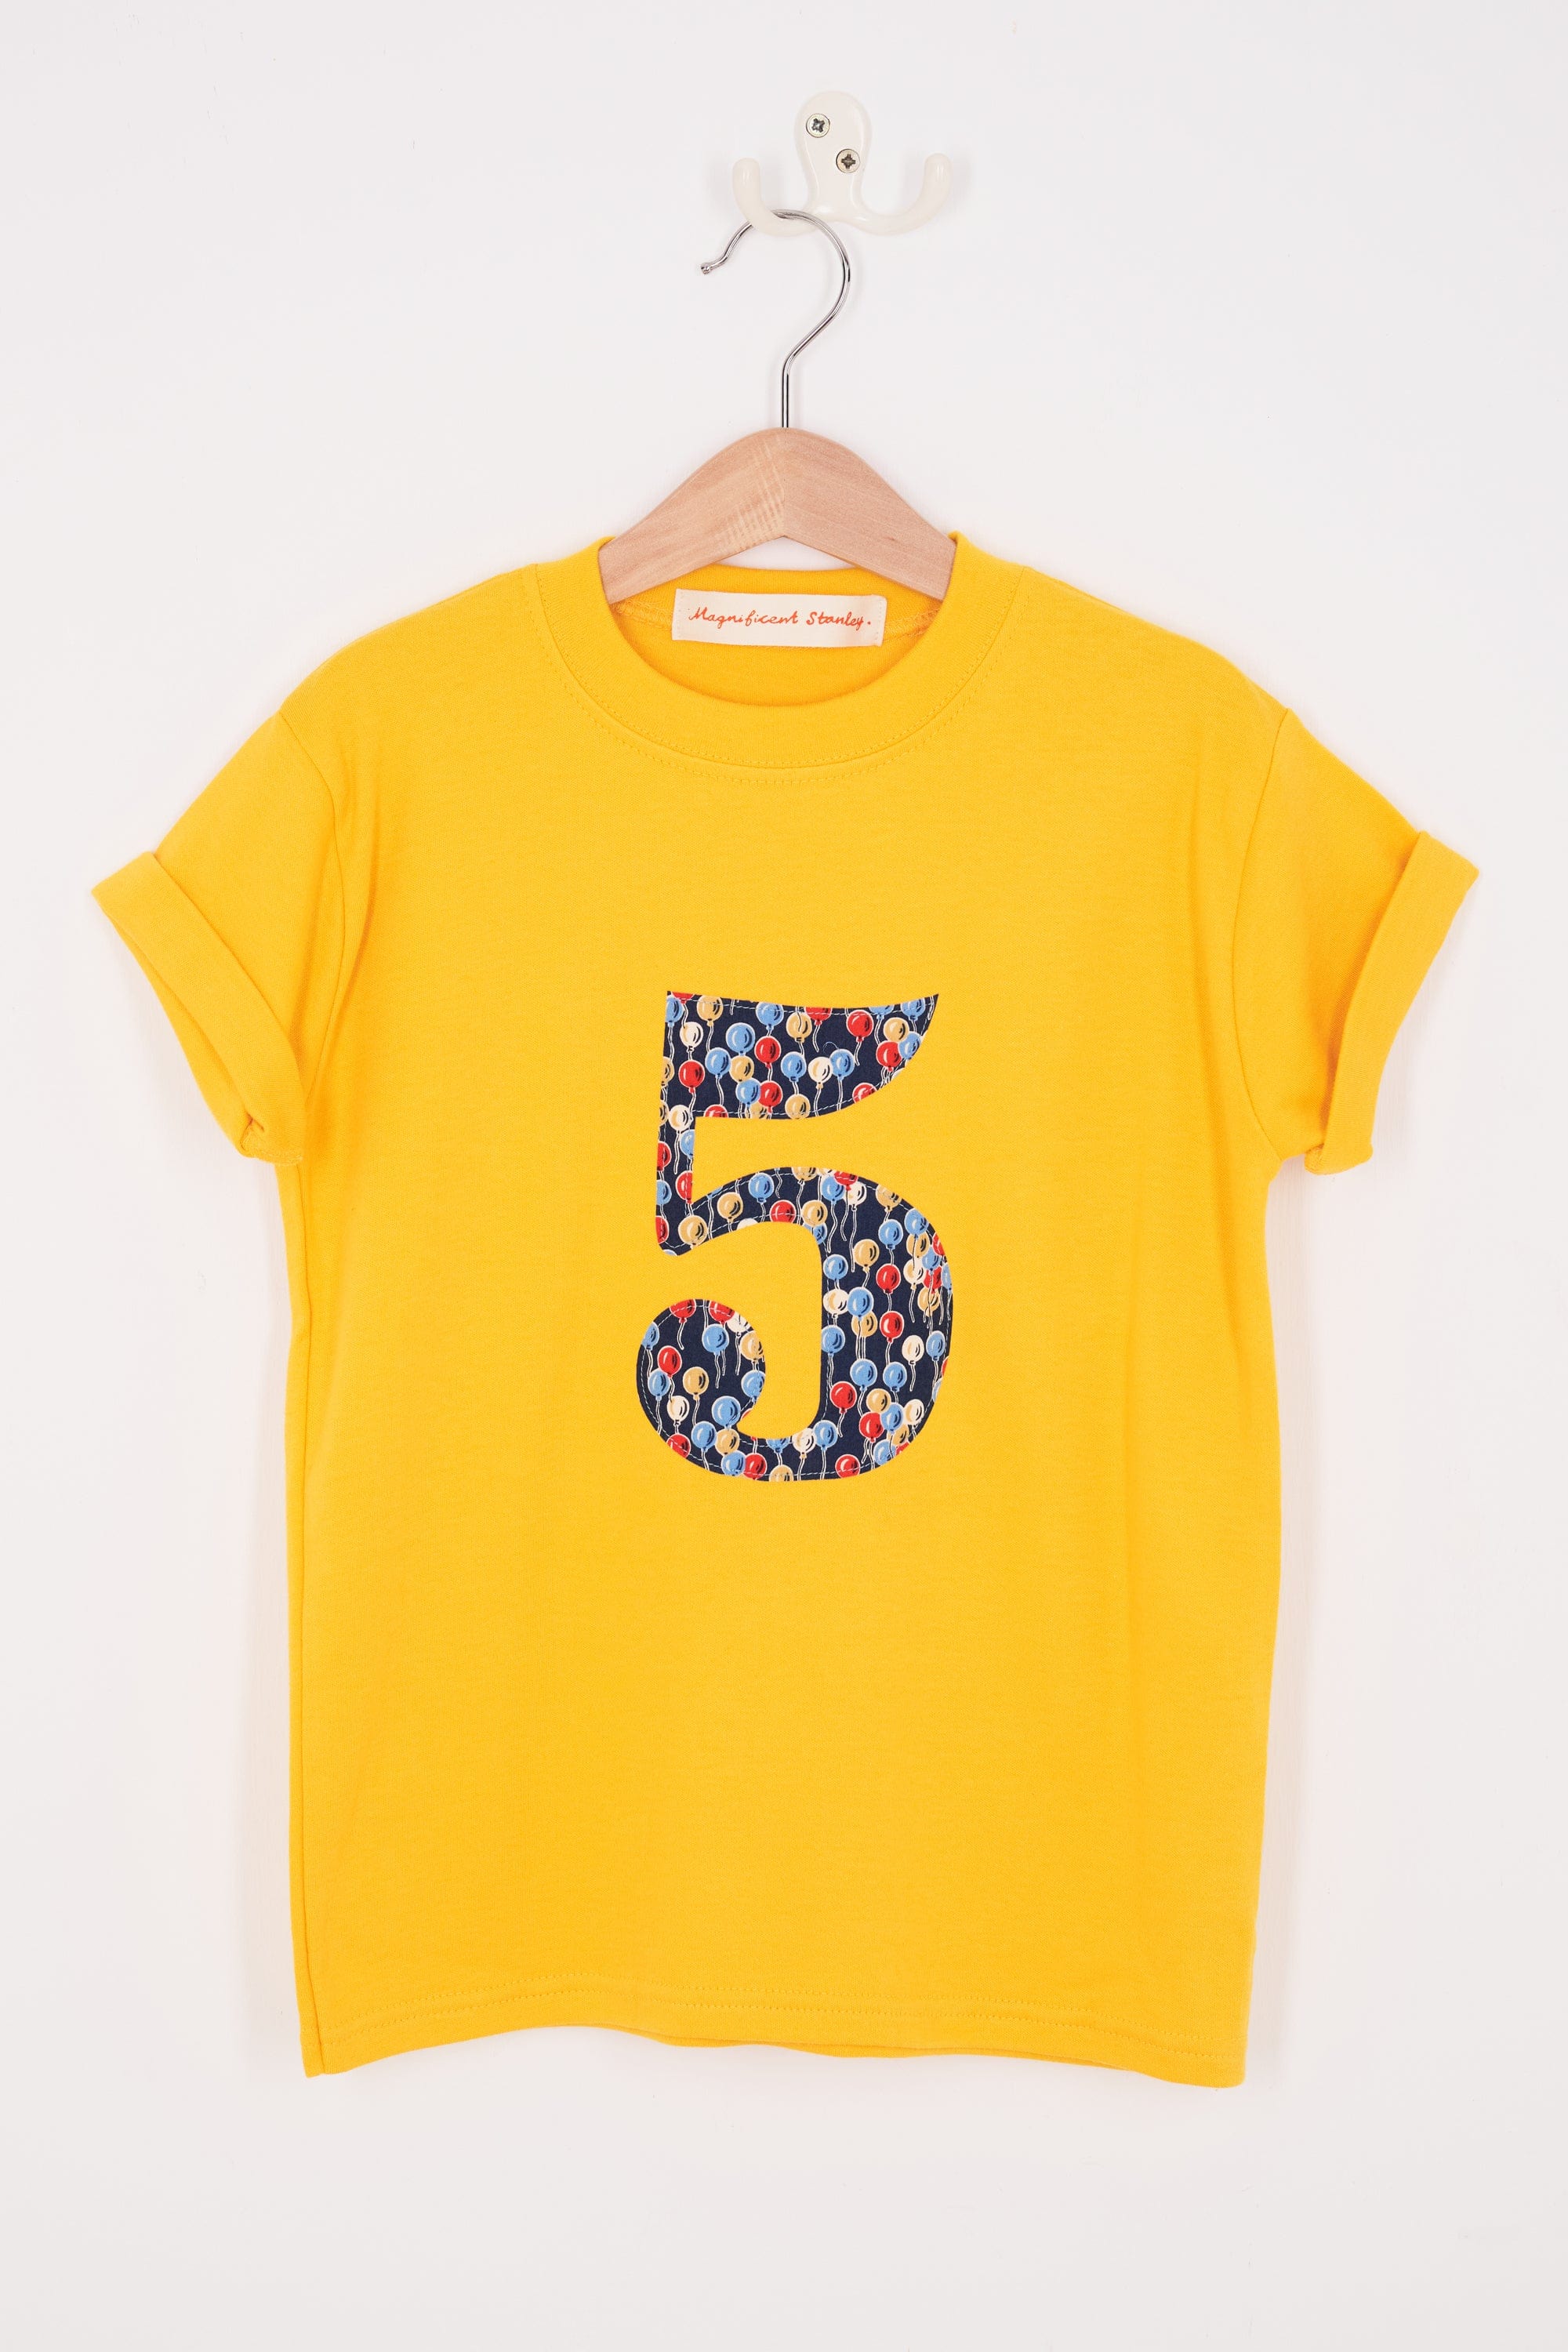 Magnificent Stanley Tee Personalised or Number Yellow T-Shirt in Ethan's Party Liberty Print